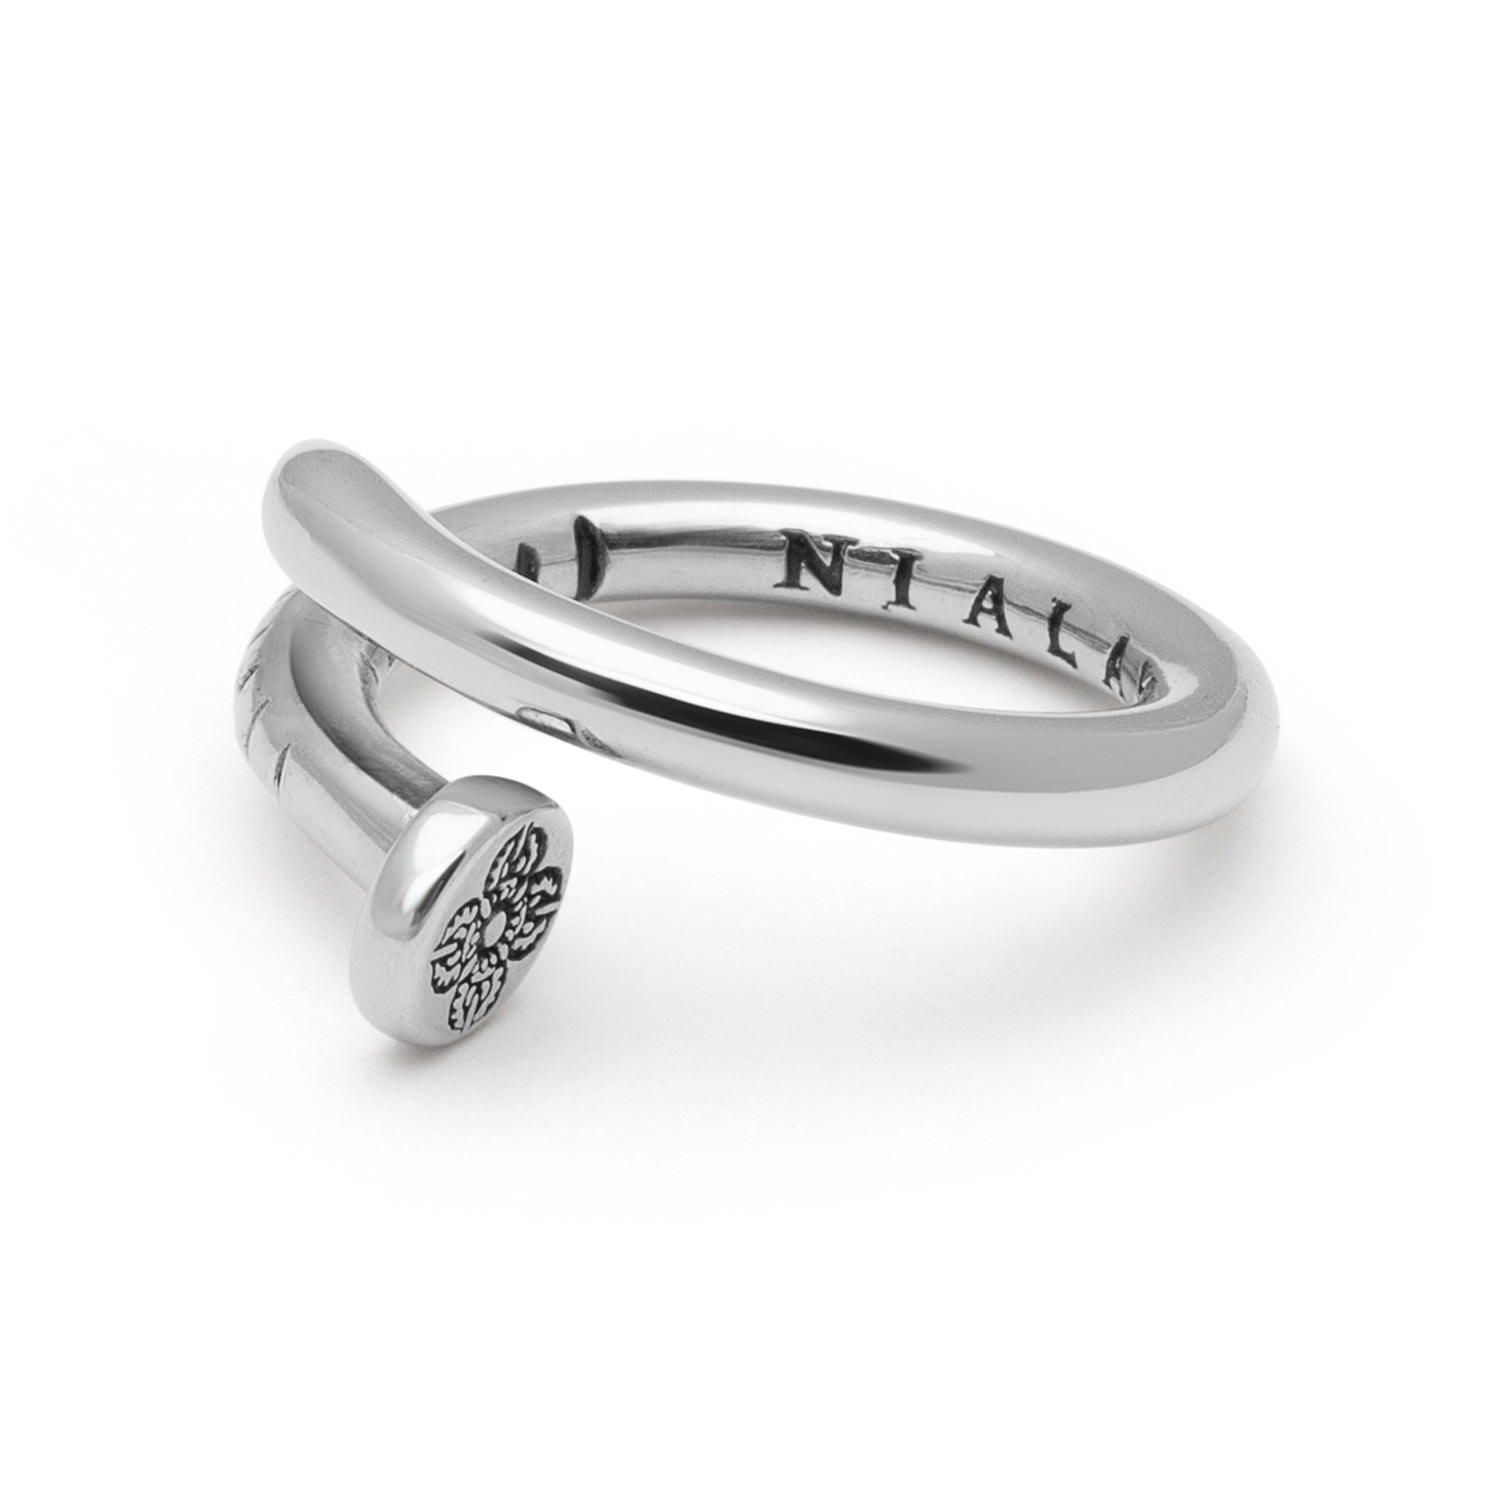 Men's Nail Ring With Dorje Engraving And Silver Finish Nialaya Jewelry